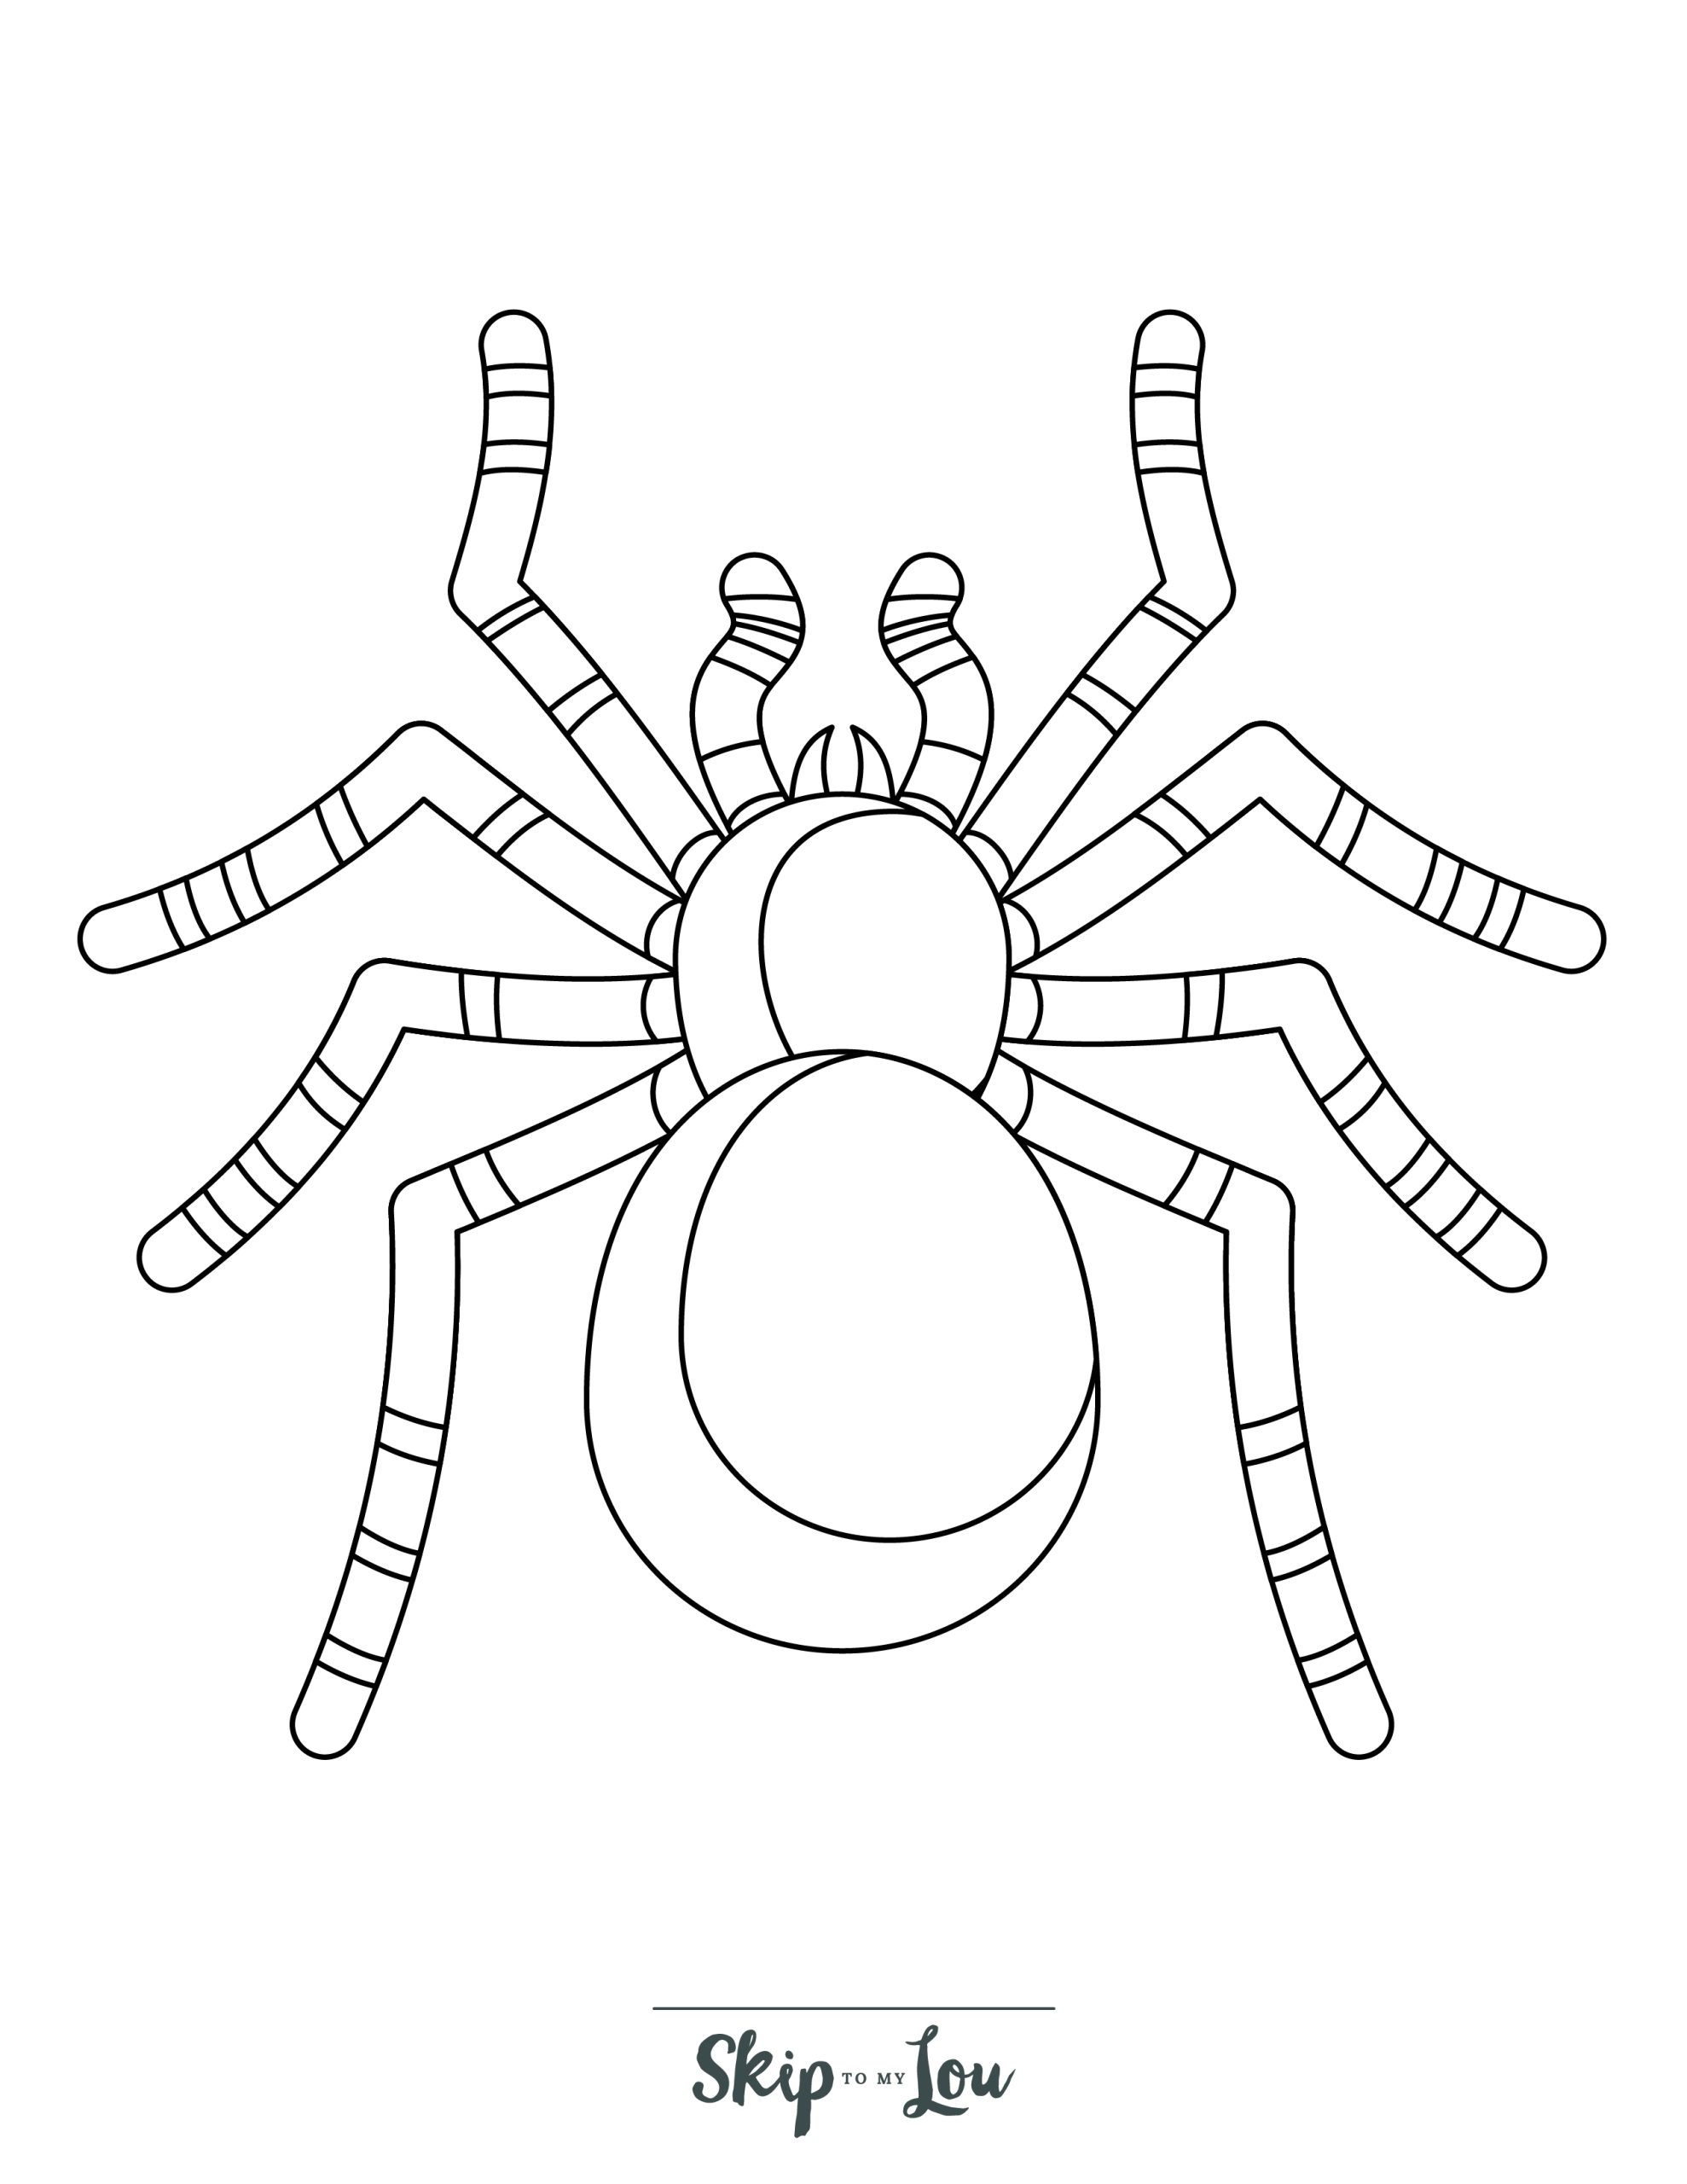 Spider coloring pages free printable pdf sheets skip to my lou